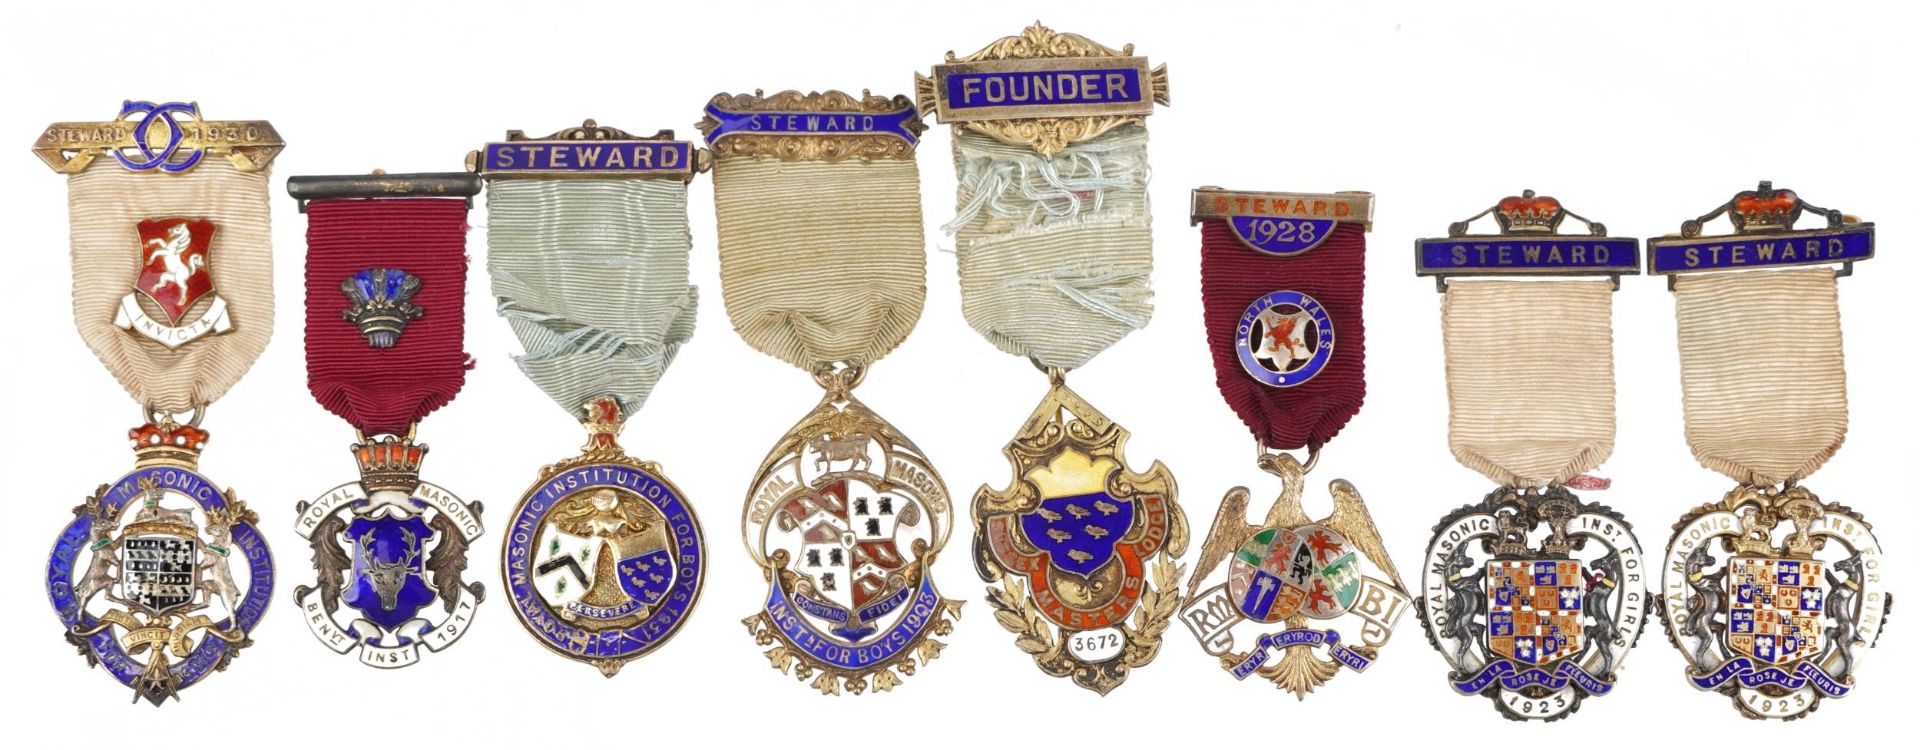 Eight masonic silver and enamelled jewels including six Steward and one Founder, total 190g